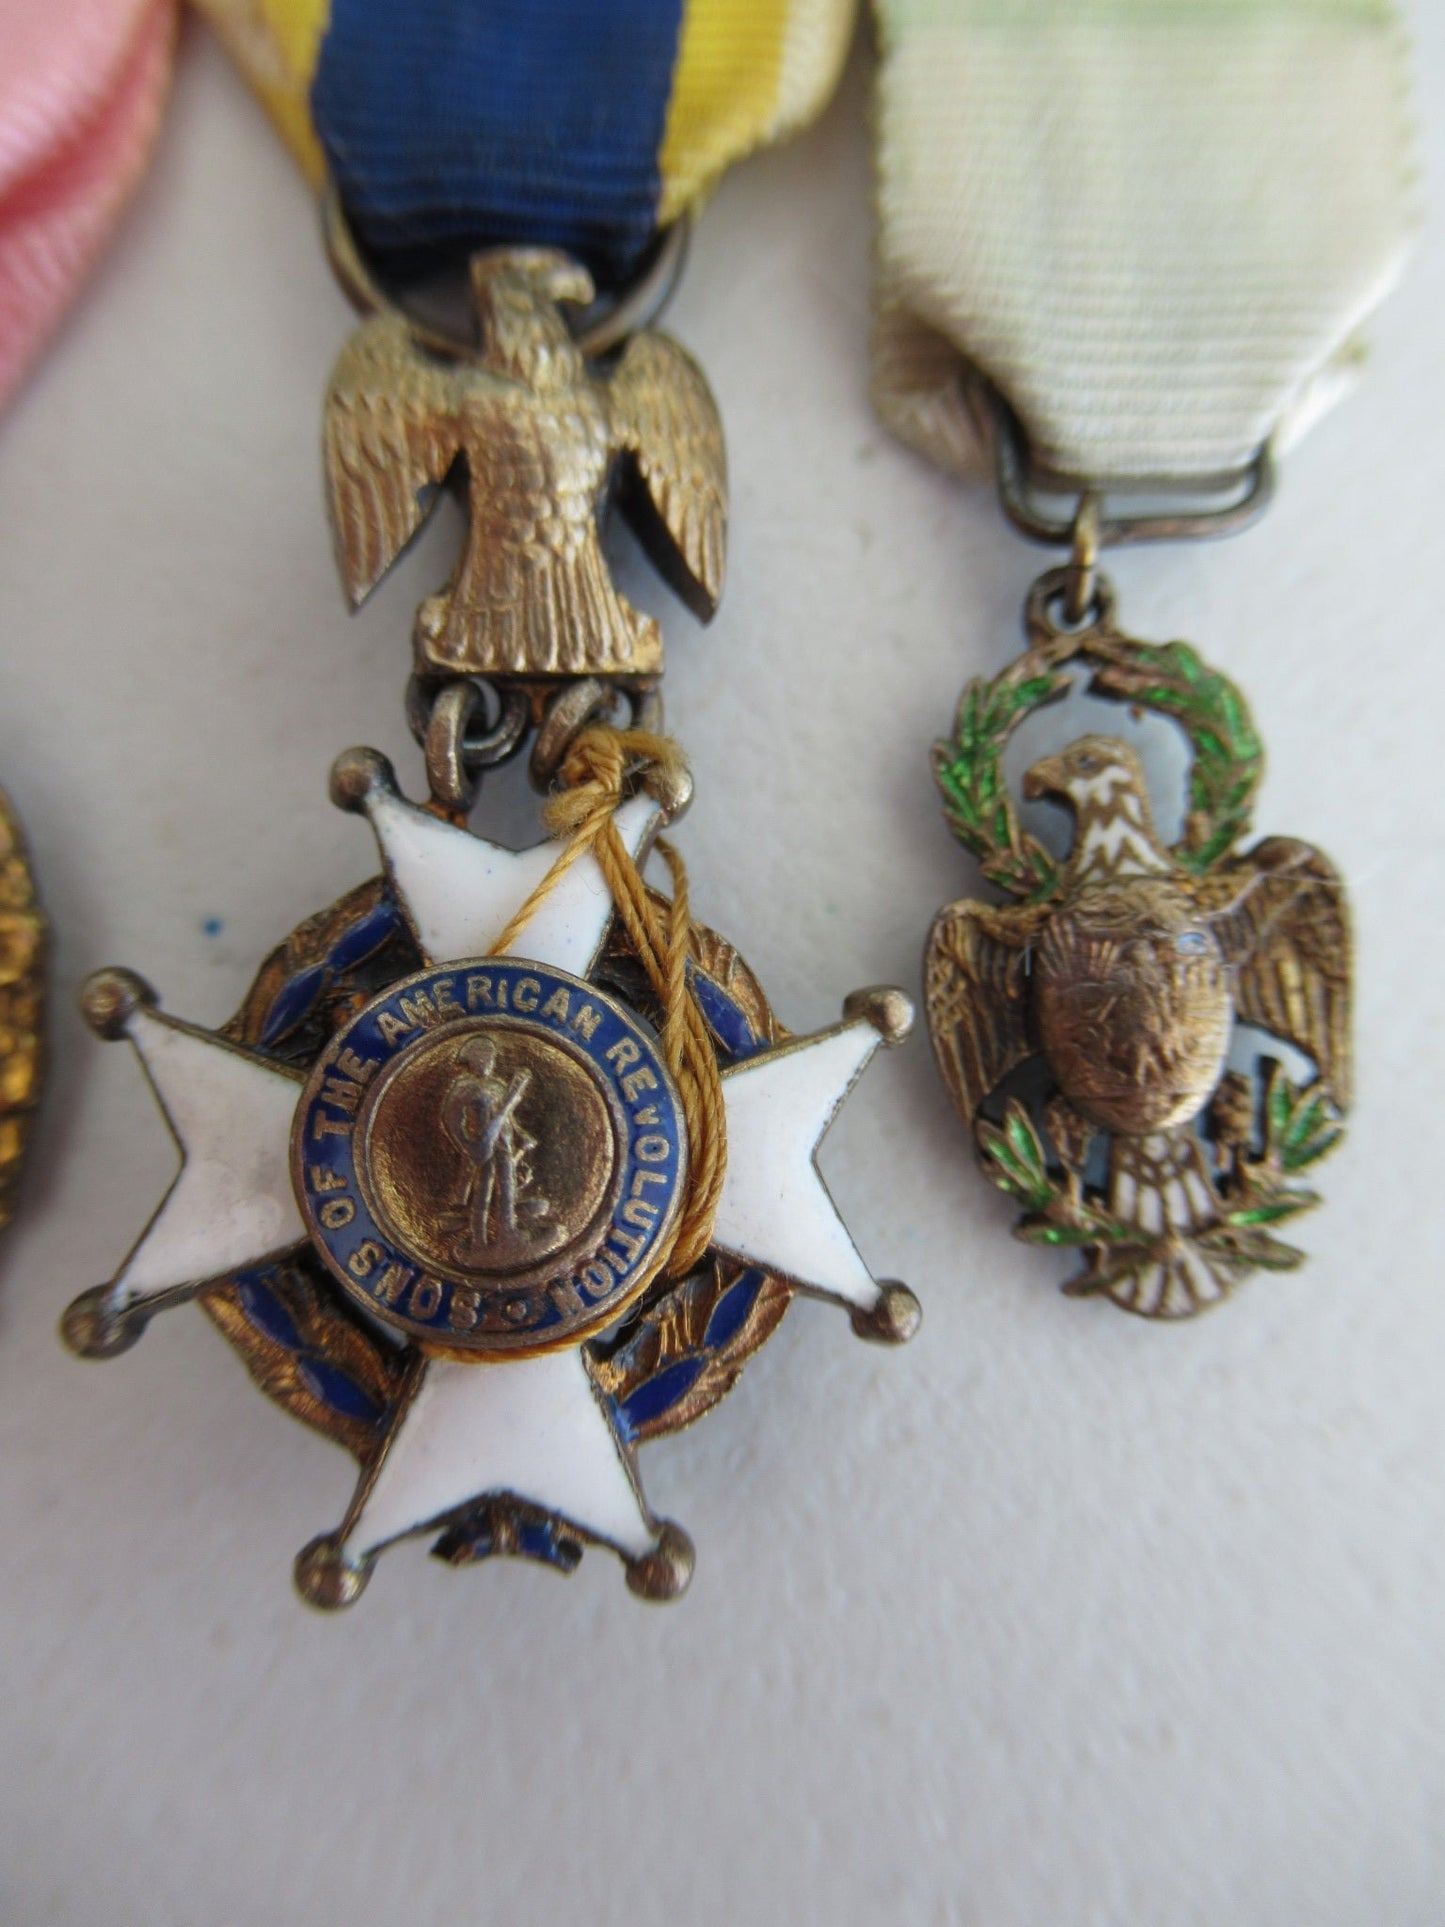 USA COMPLETE GROUP OF MEDALS BELONGING TO GENERAL HUNTINGTON HILL FEATURING A PURPLE HEART FOR VALOR AND MANY OTHER NAMED MEDALS